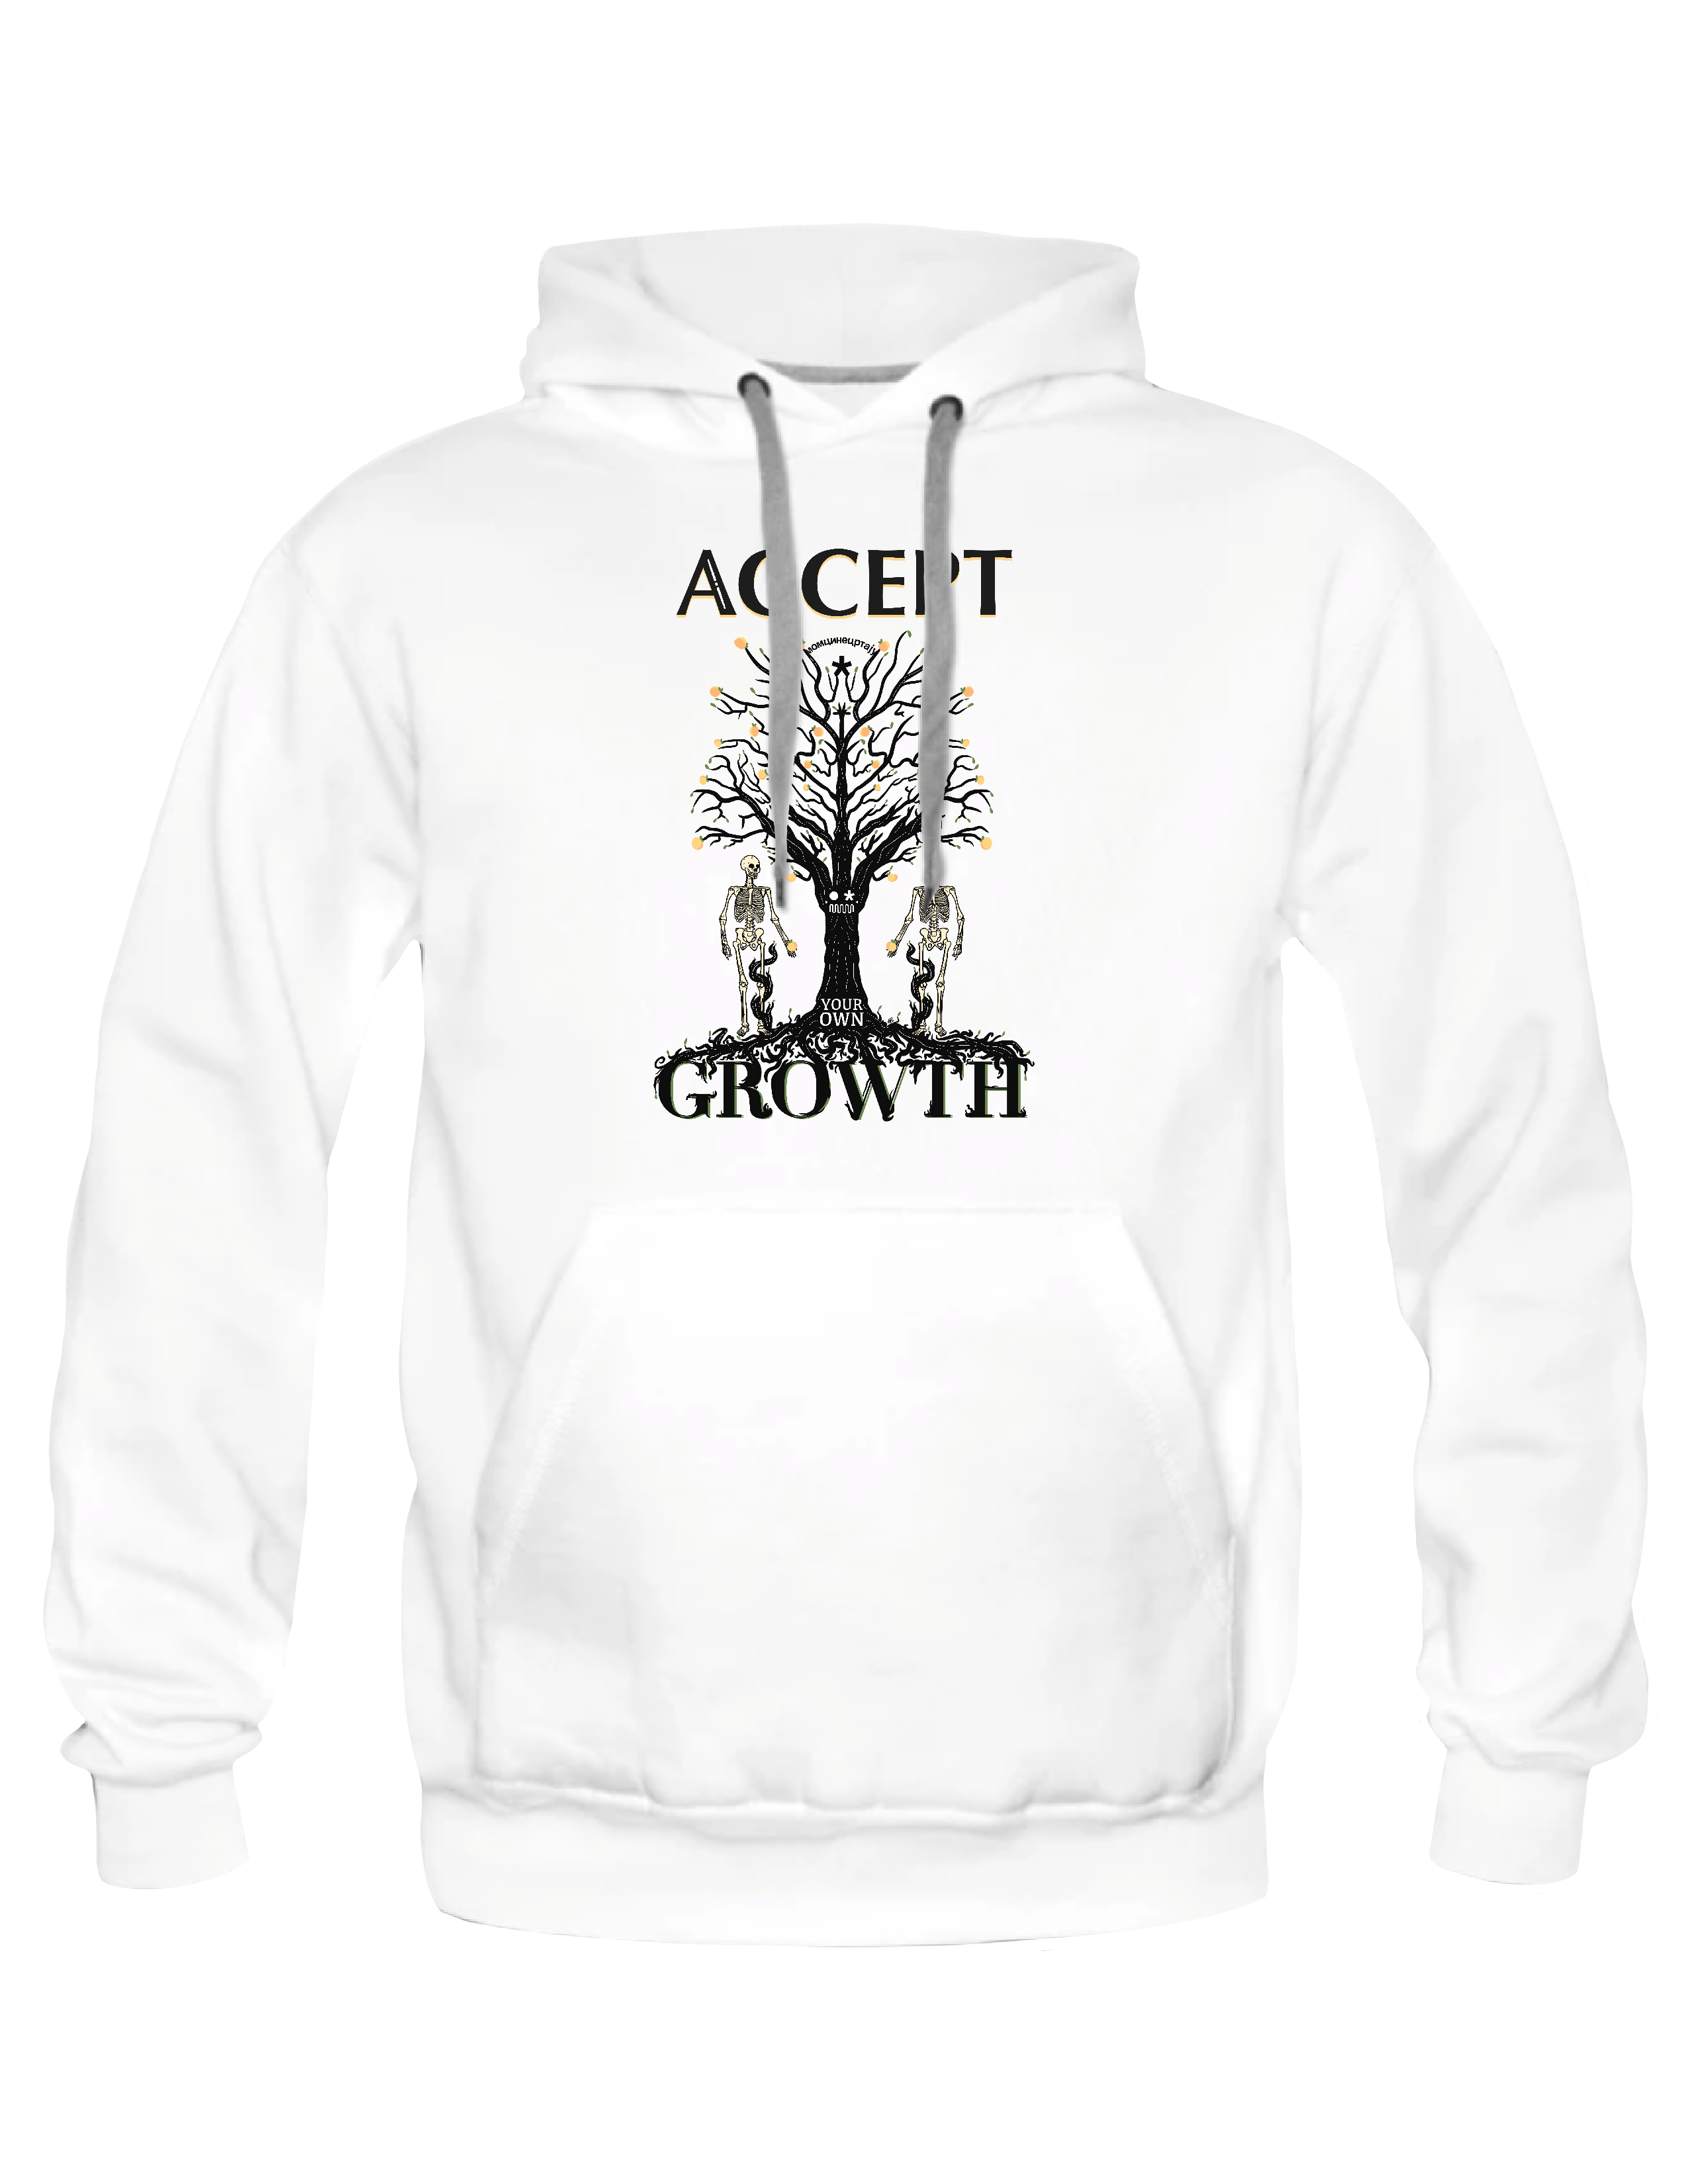 AFFIRMATION PACK - ACCEPT YOUR OWN GROWTH - Hoodie by BOYSDONTDRAW